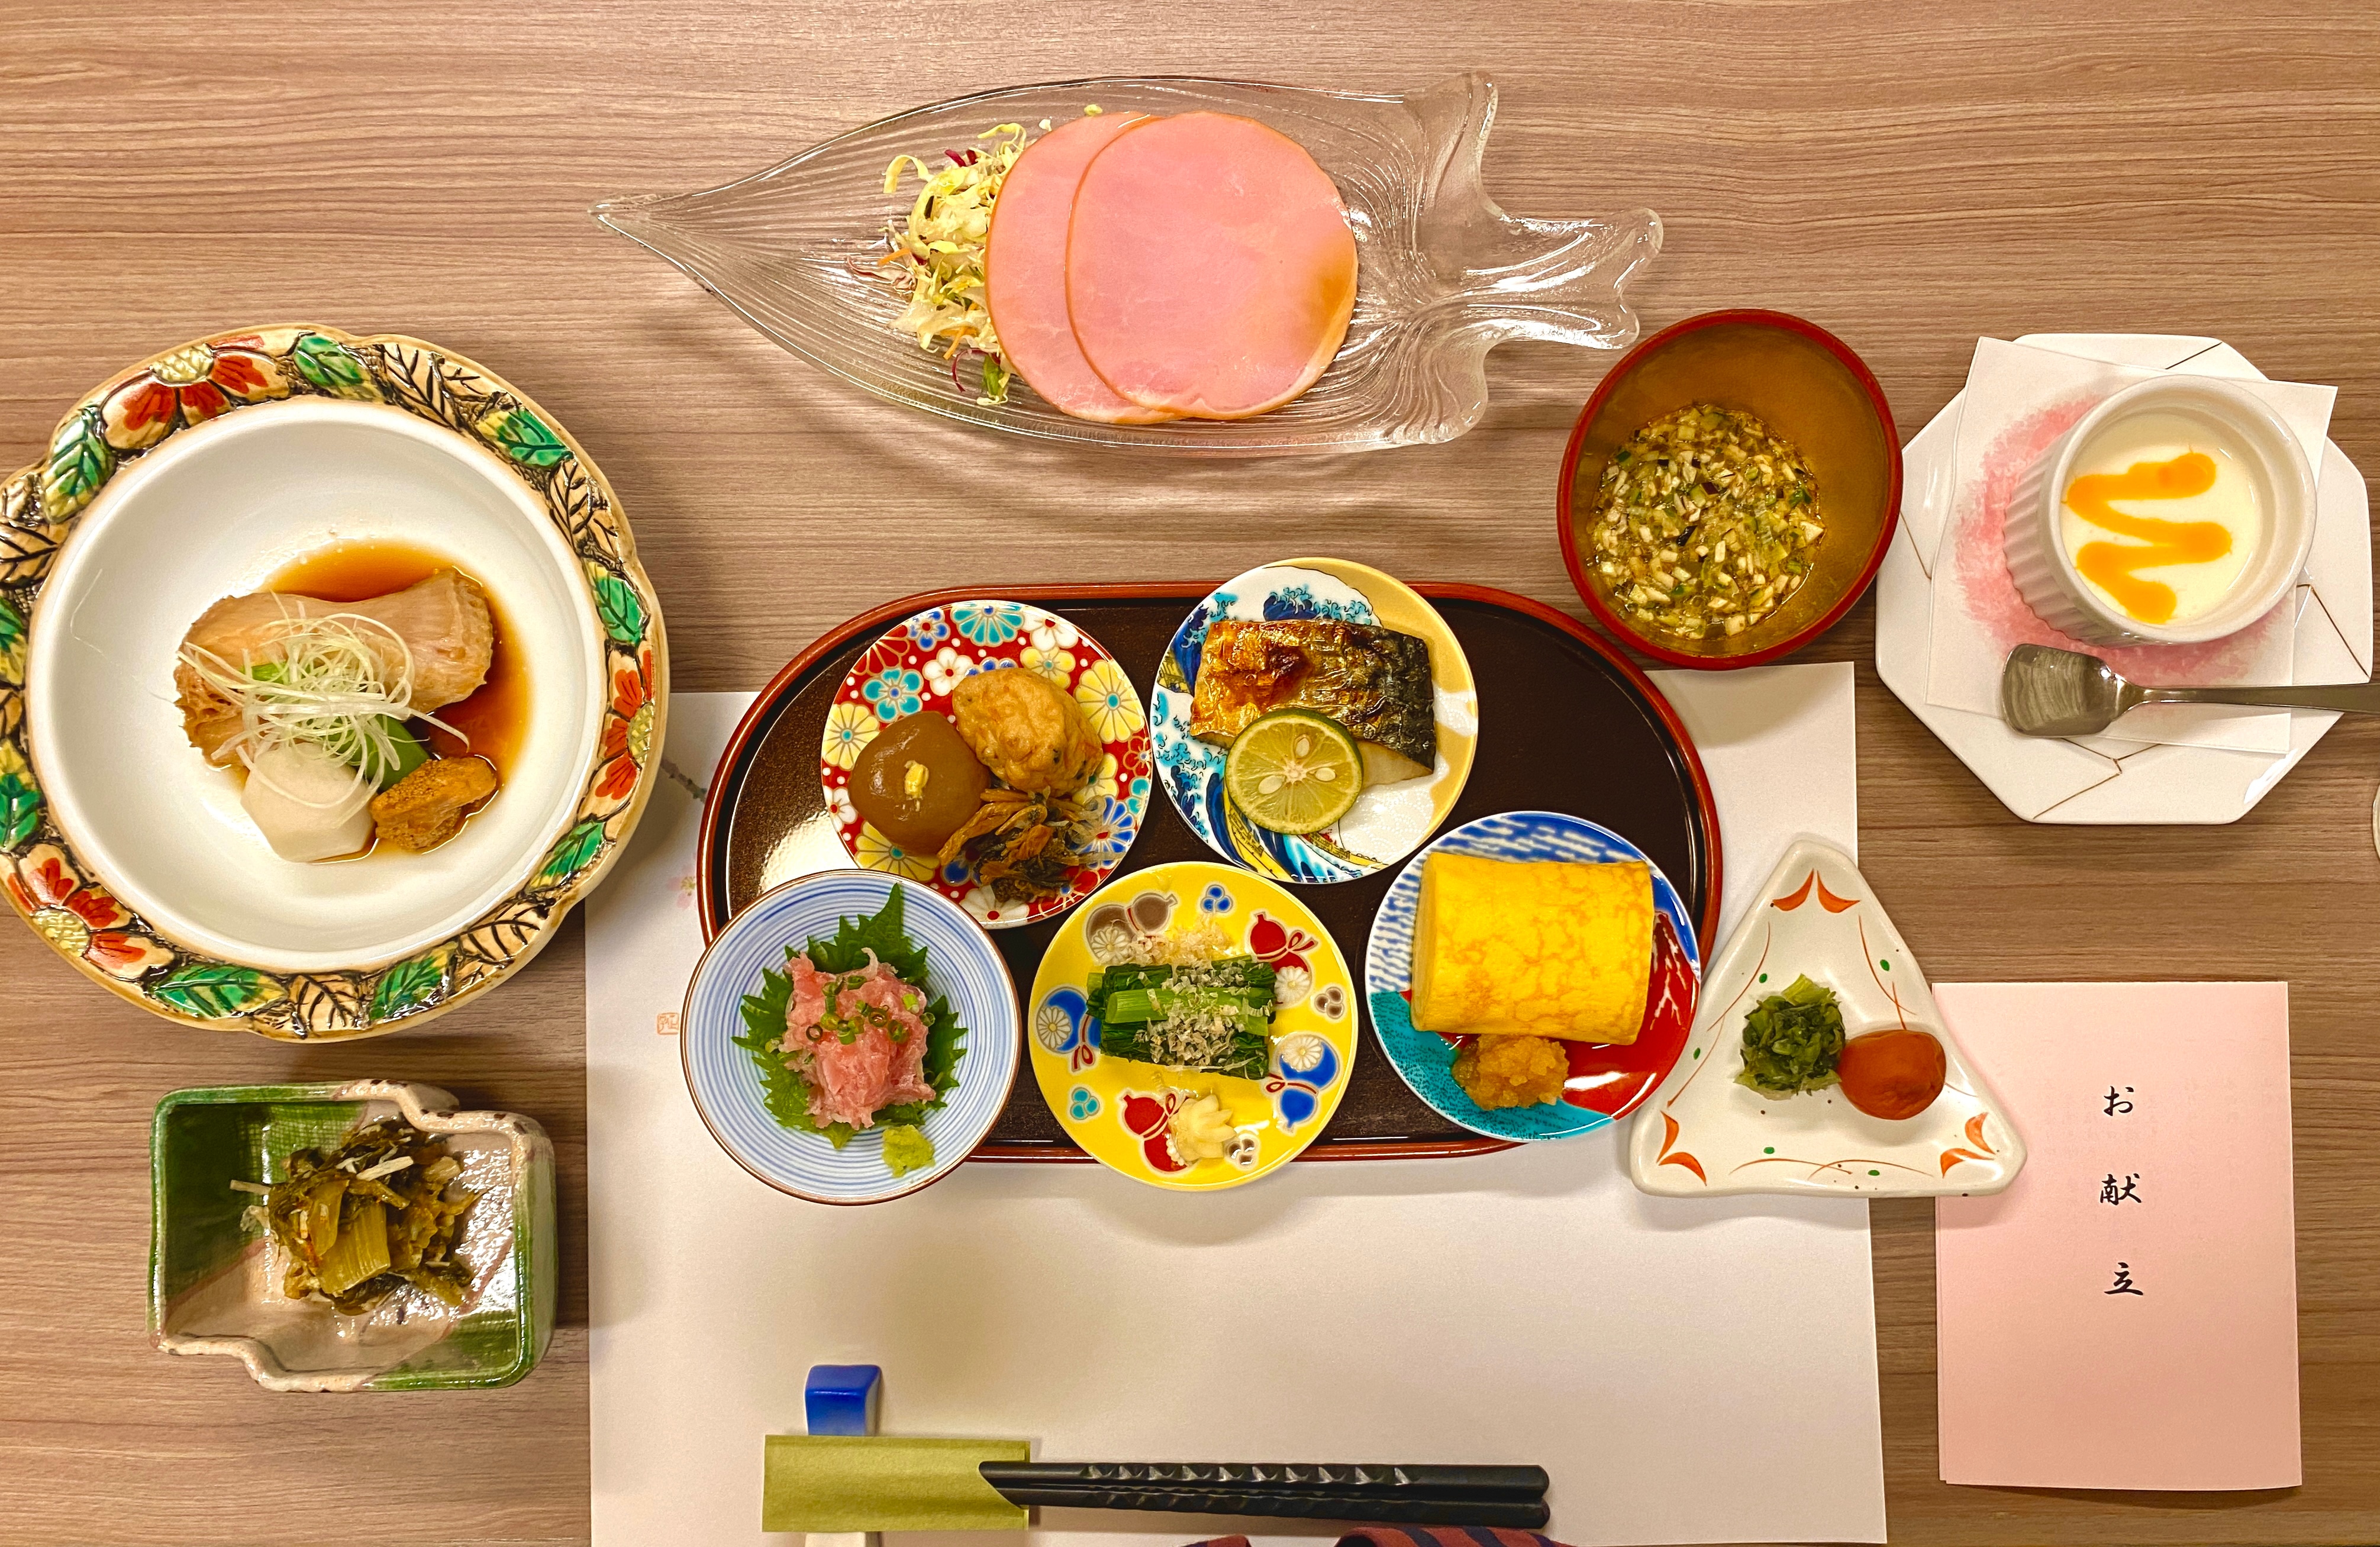 An example of Japanese breakfast